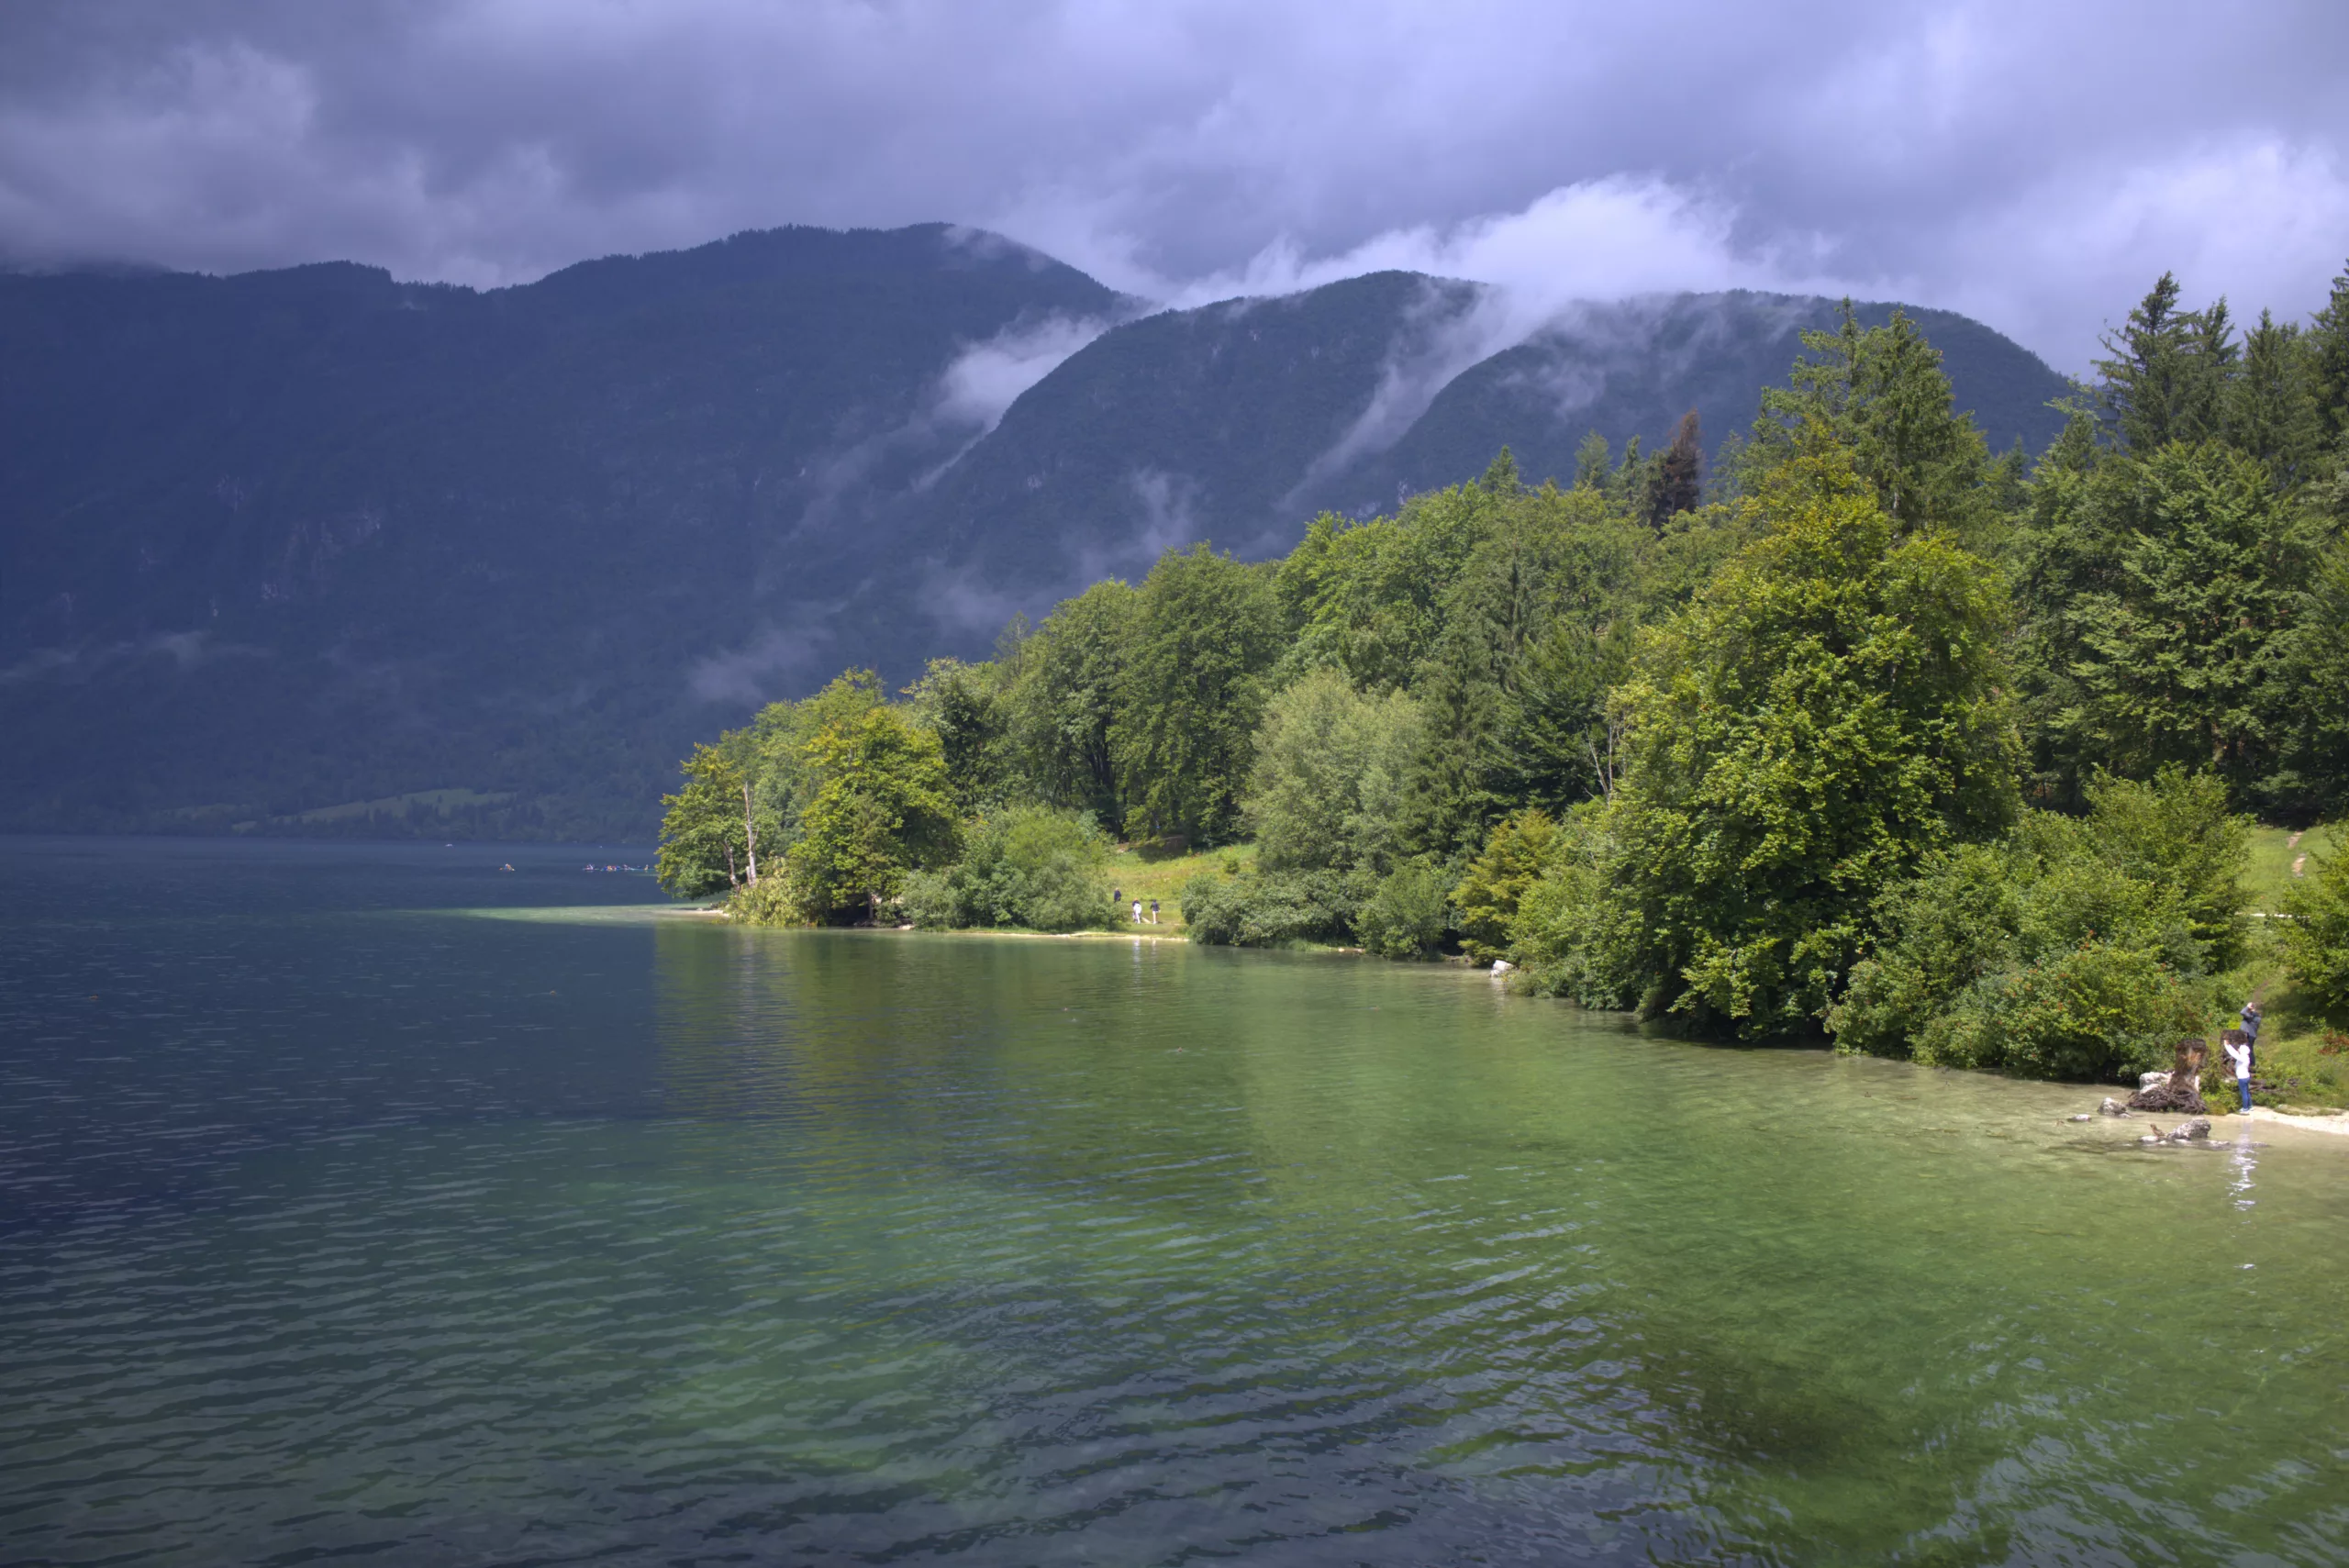 The view in Lake Bohinj from Slovenia